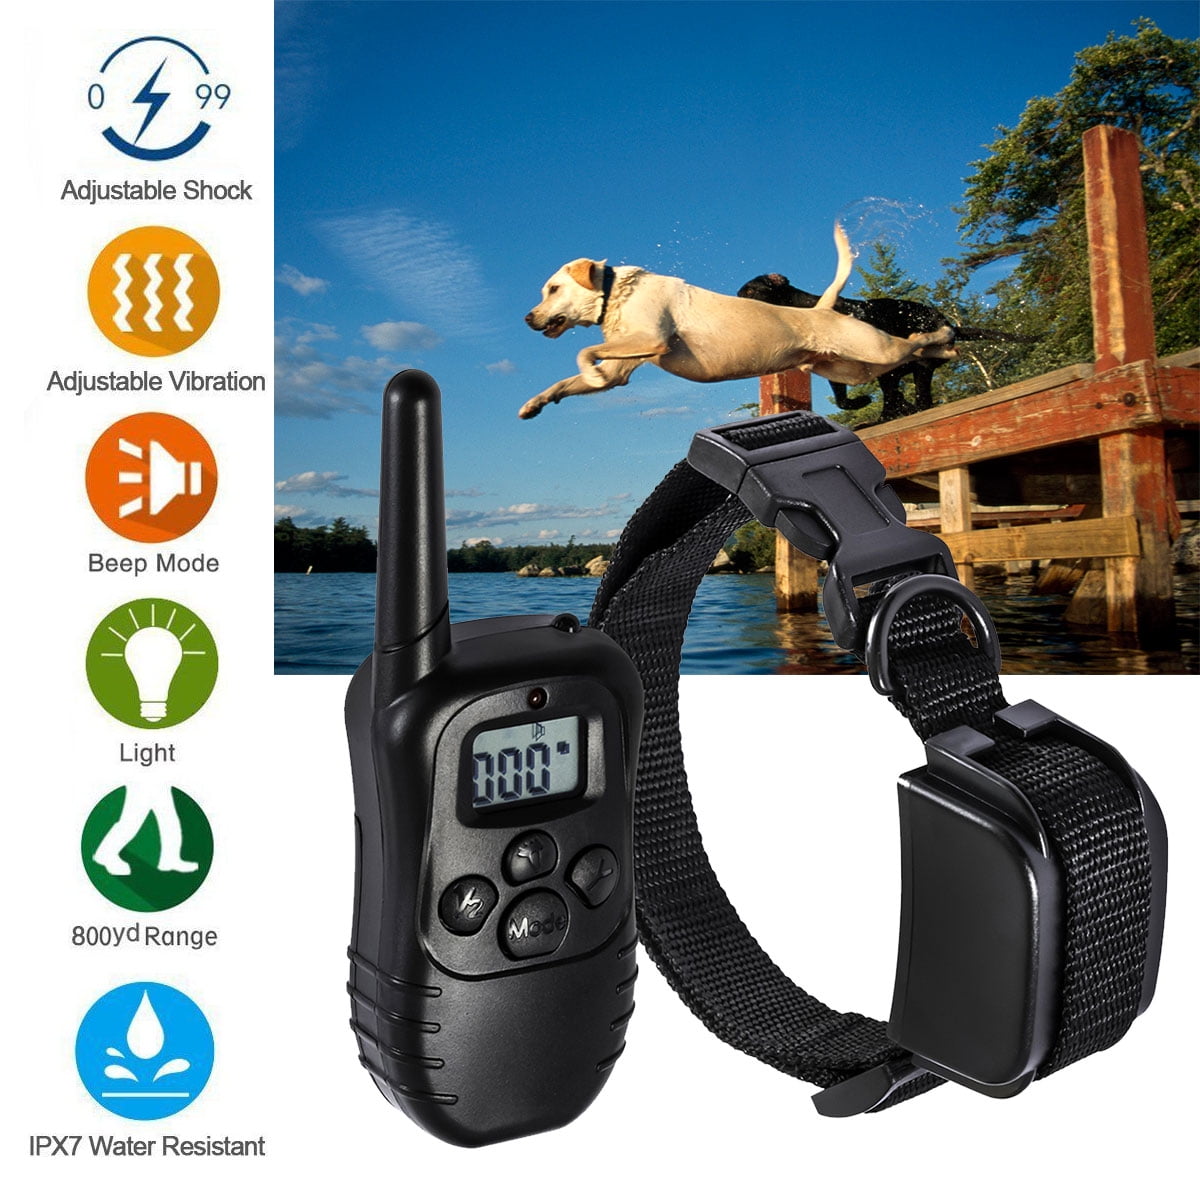 Details about   GoodBoy GB812 Dog Training Remote Collar with Vibration/Shock Modes Blk/Silver 